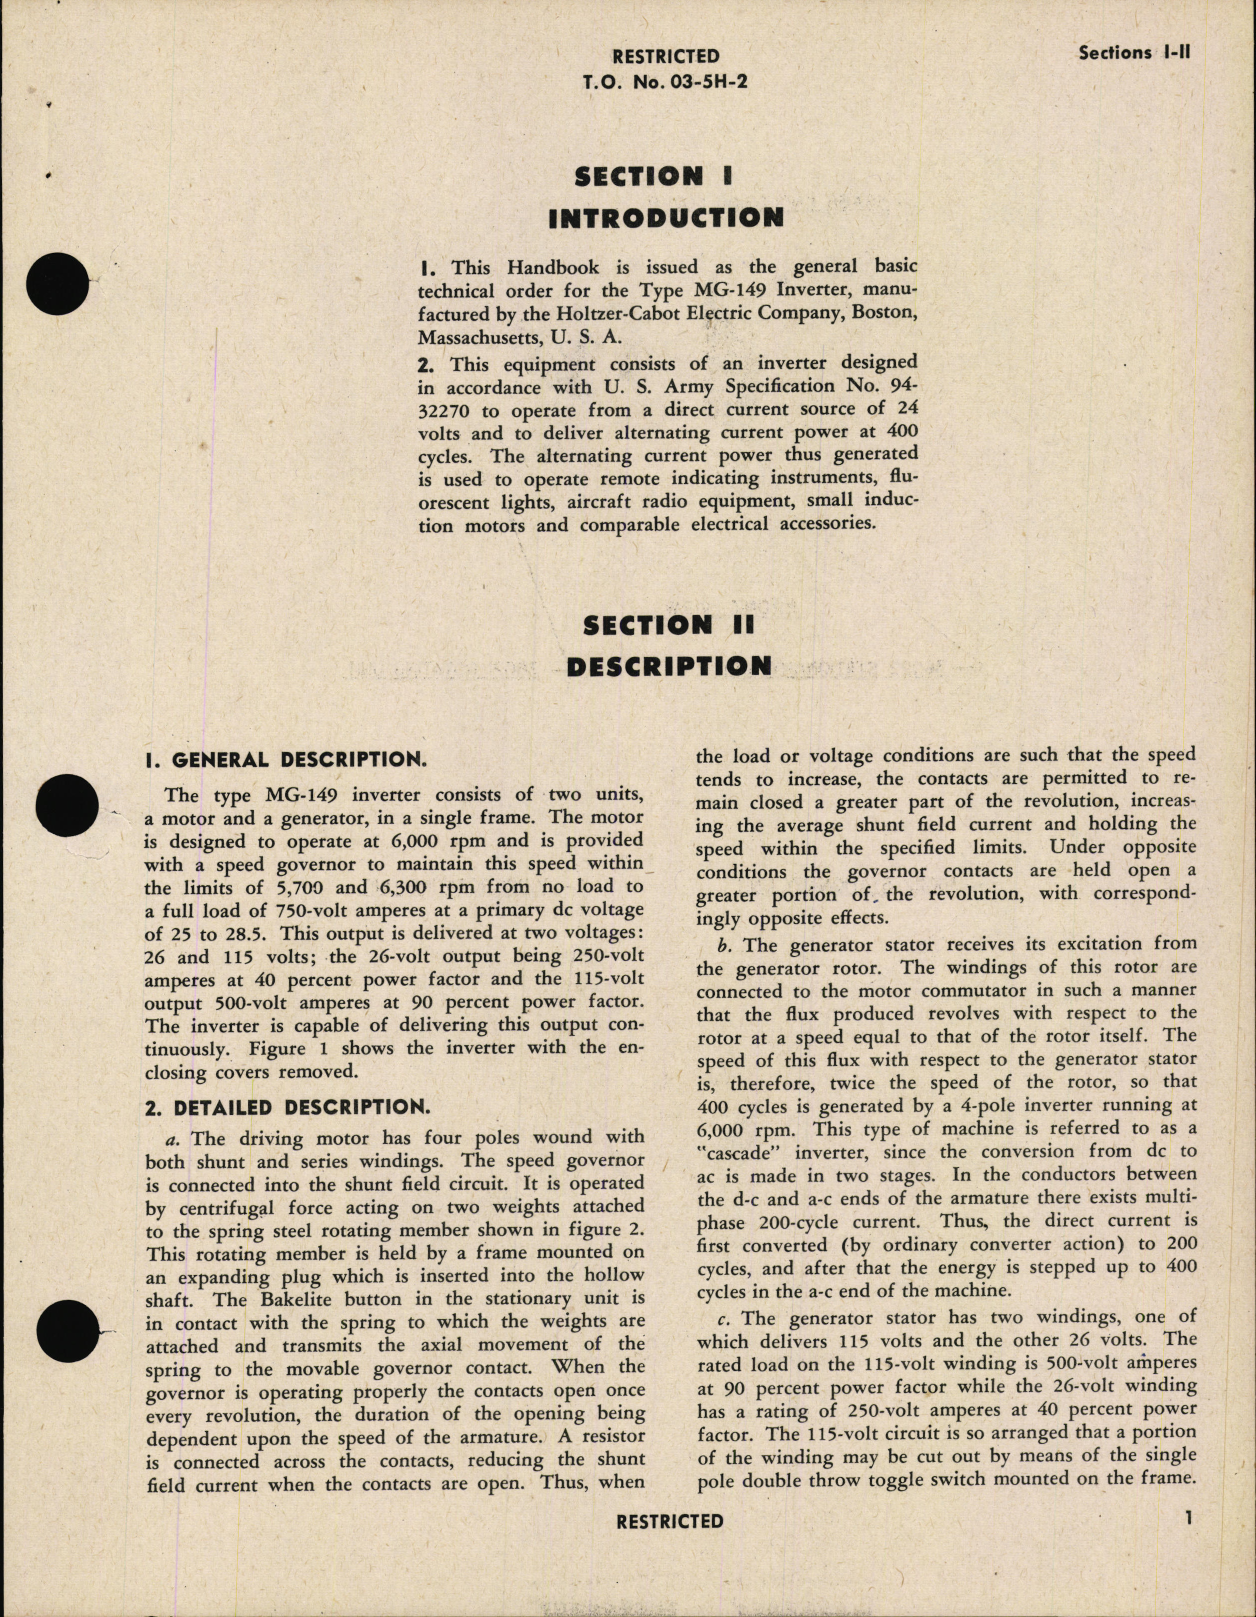 Sample page 5 from AirCorps Library document: Handbook of Instructions with Parts Catalog for Inverter Type MG-149